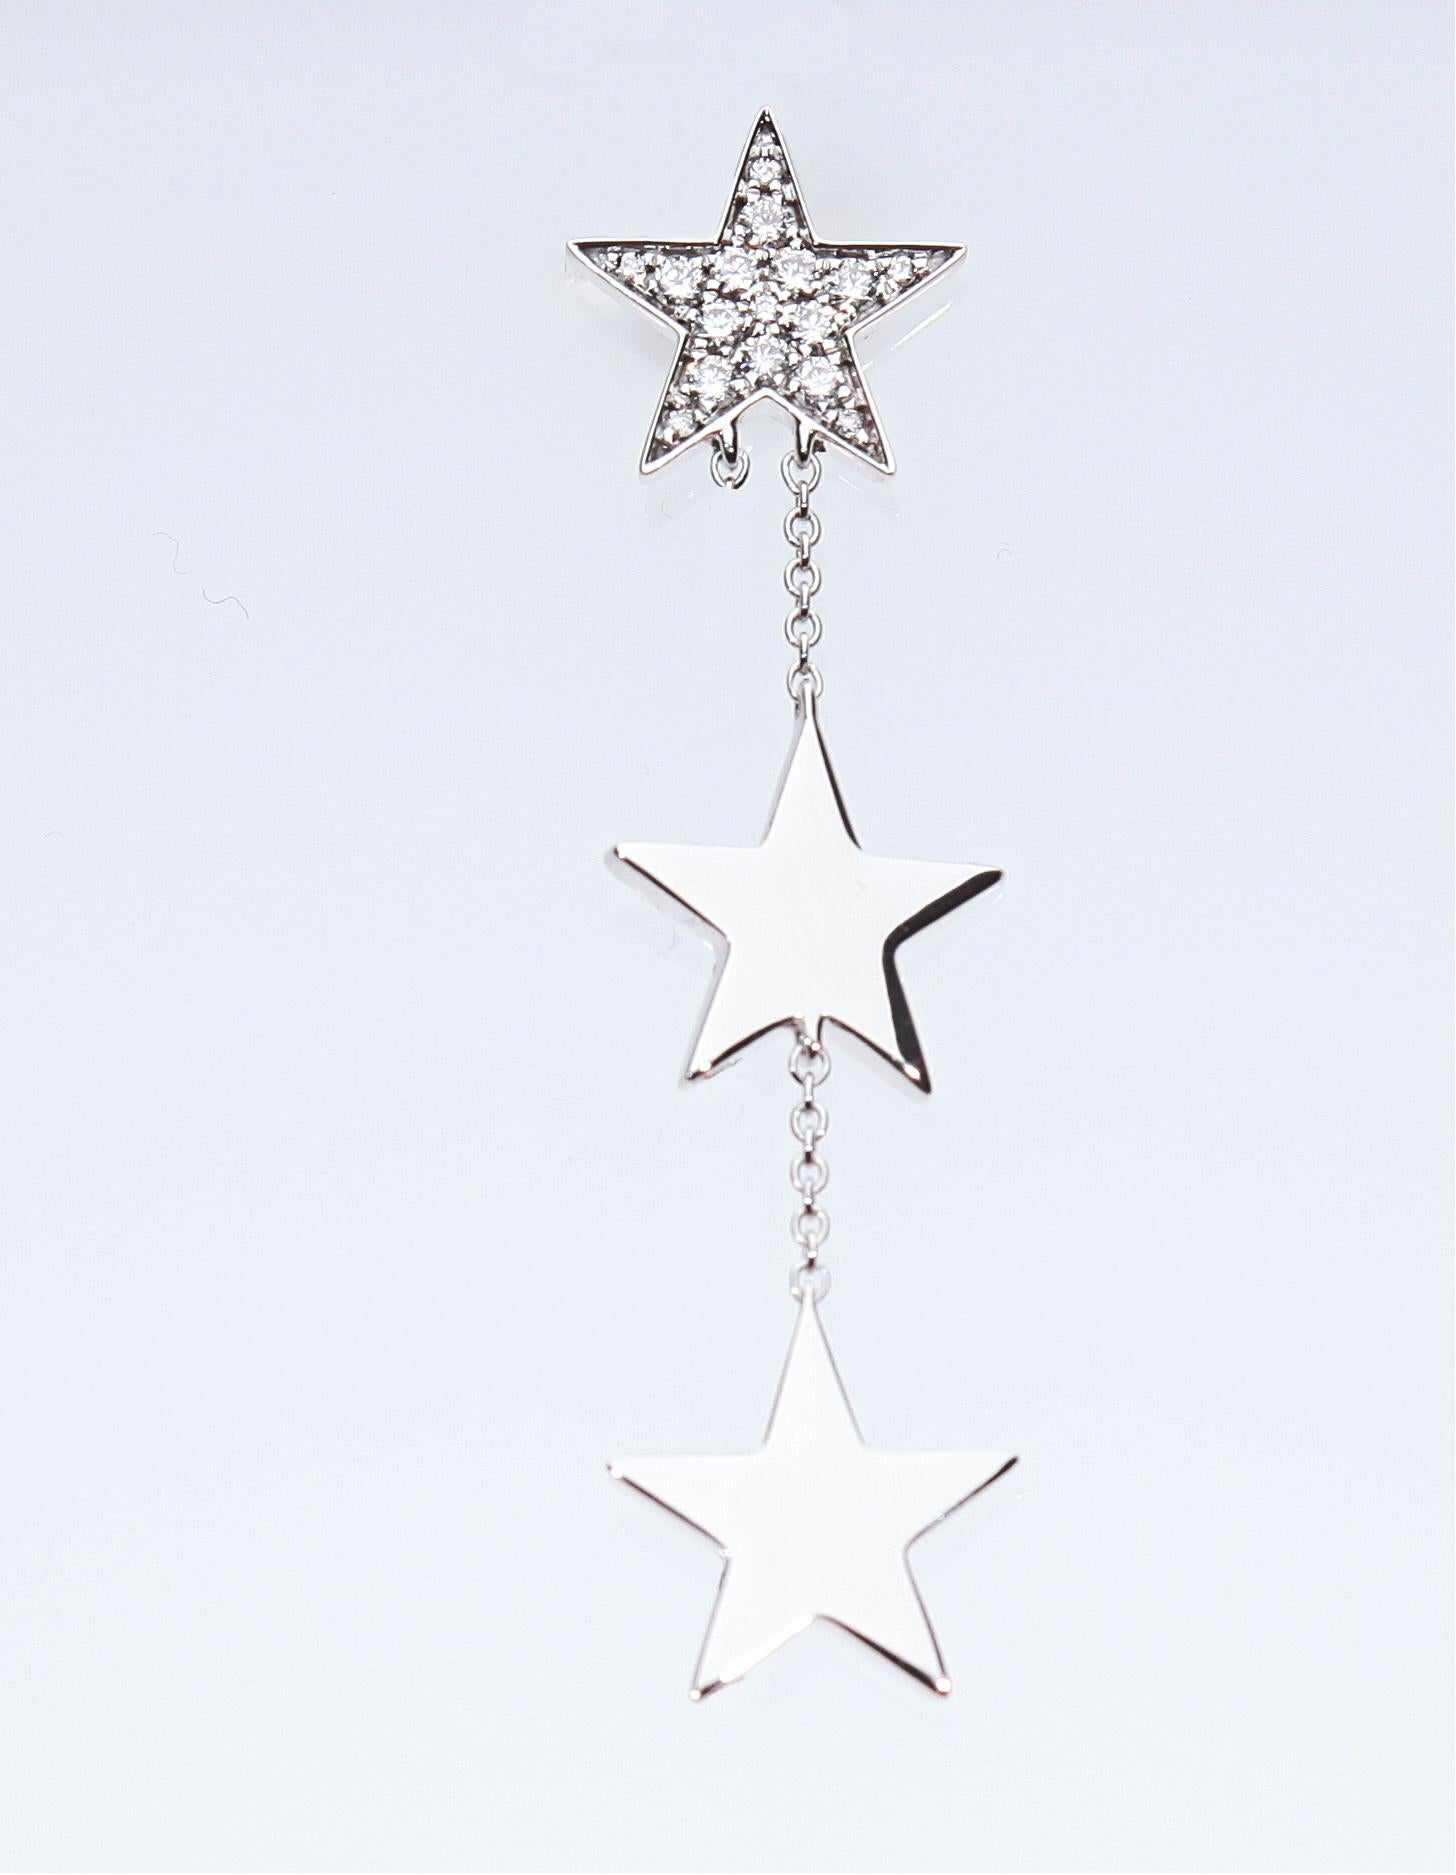 Earrings with pendent diamond stars 18 Karat white gold.
Weight Diamond: Carat 0.95.
Each earring has two white gold stars with diamond pavé and two white gold stars.
All the stars are united with a little white gold chain 18 Karat.
These earrings